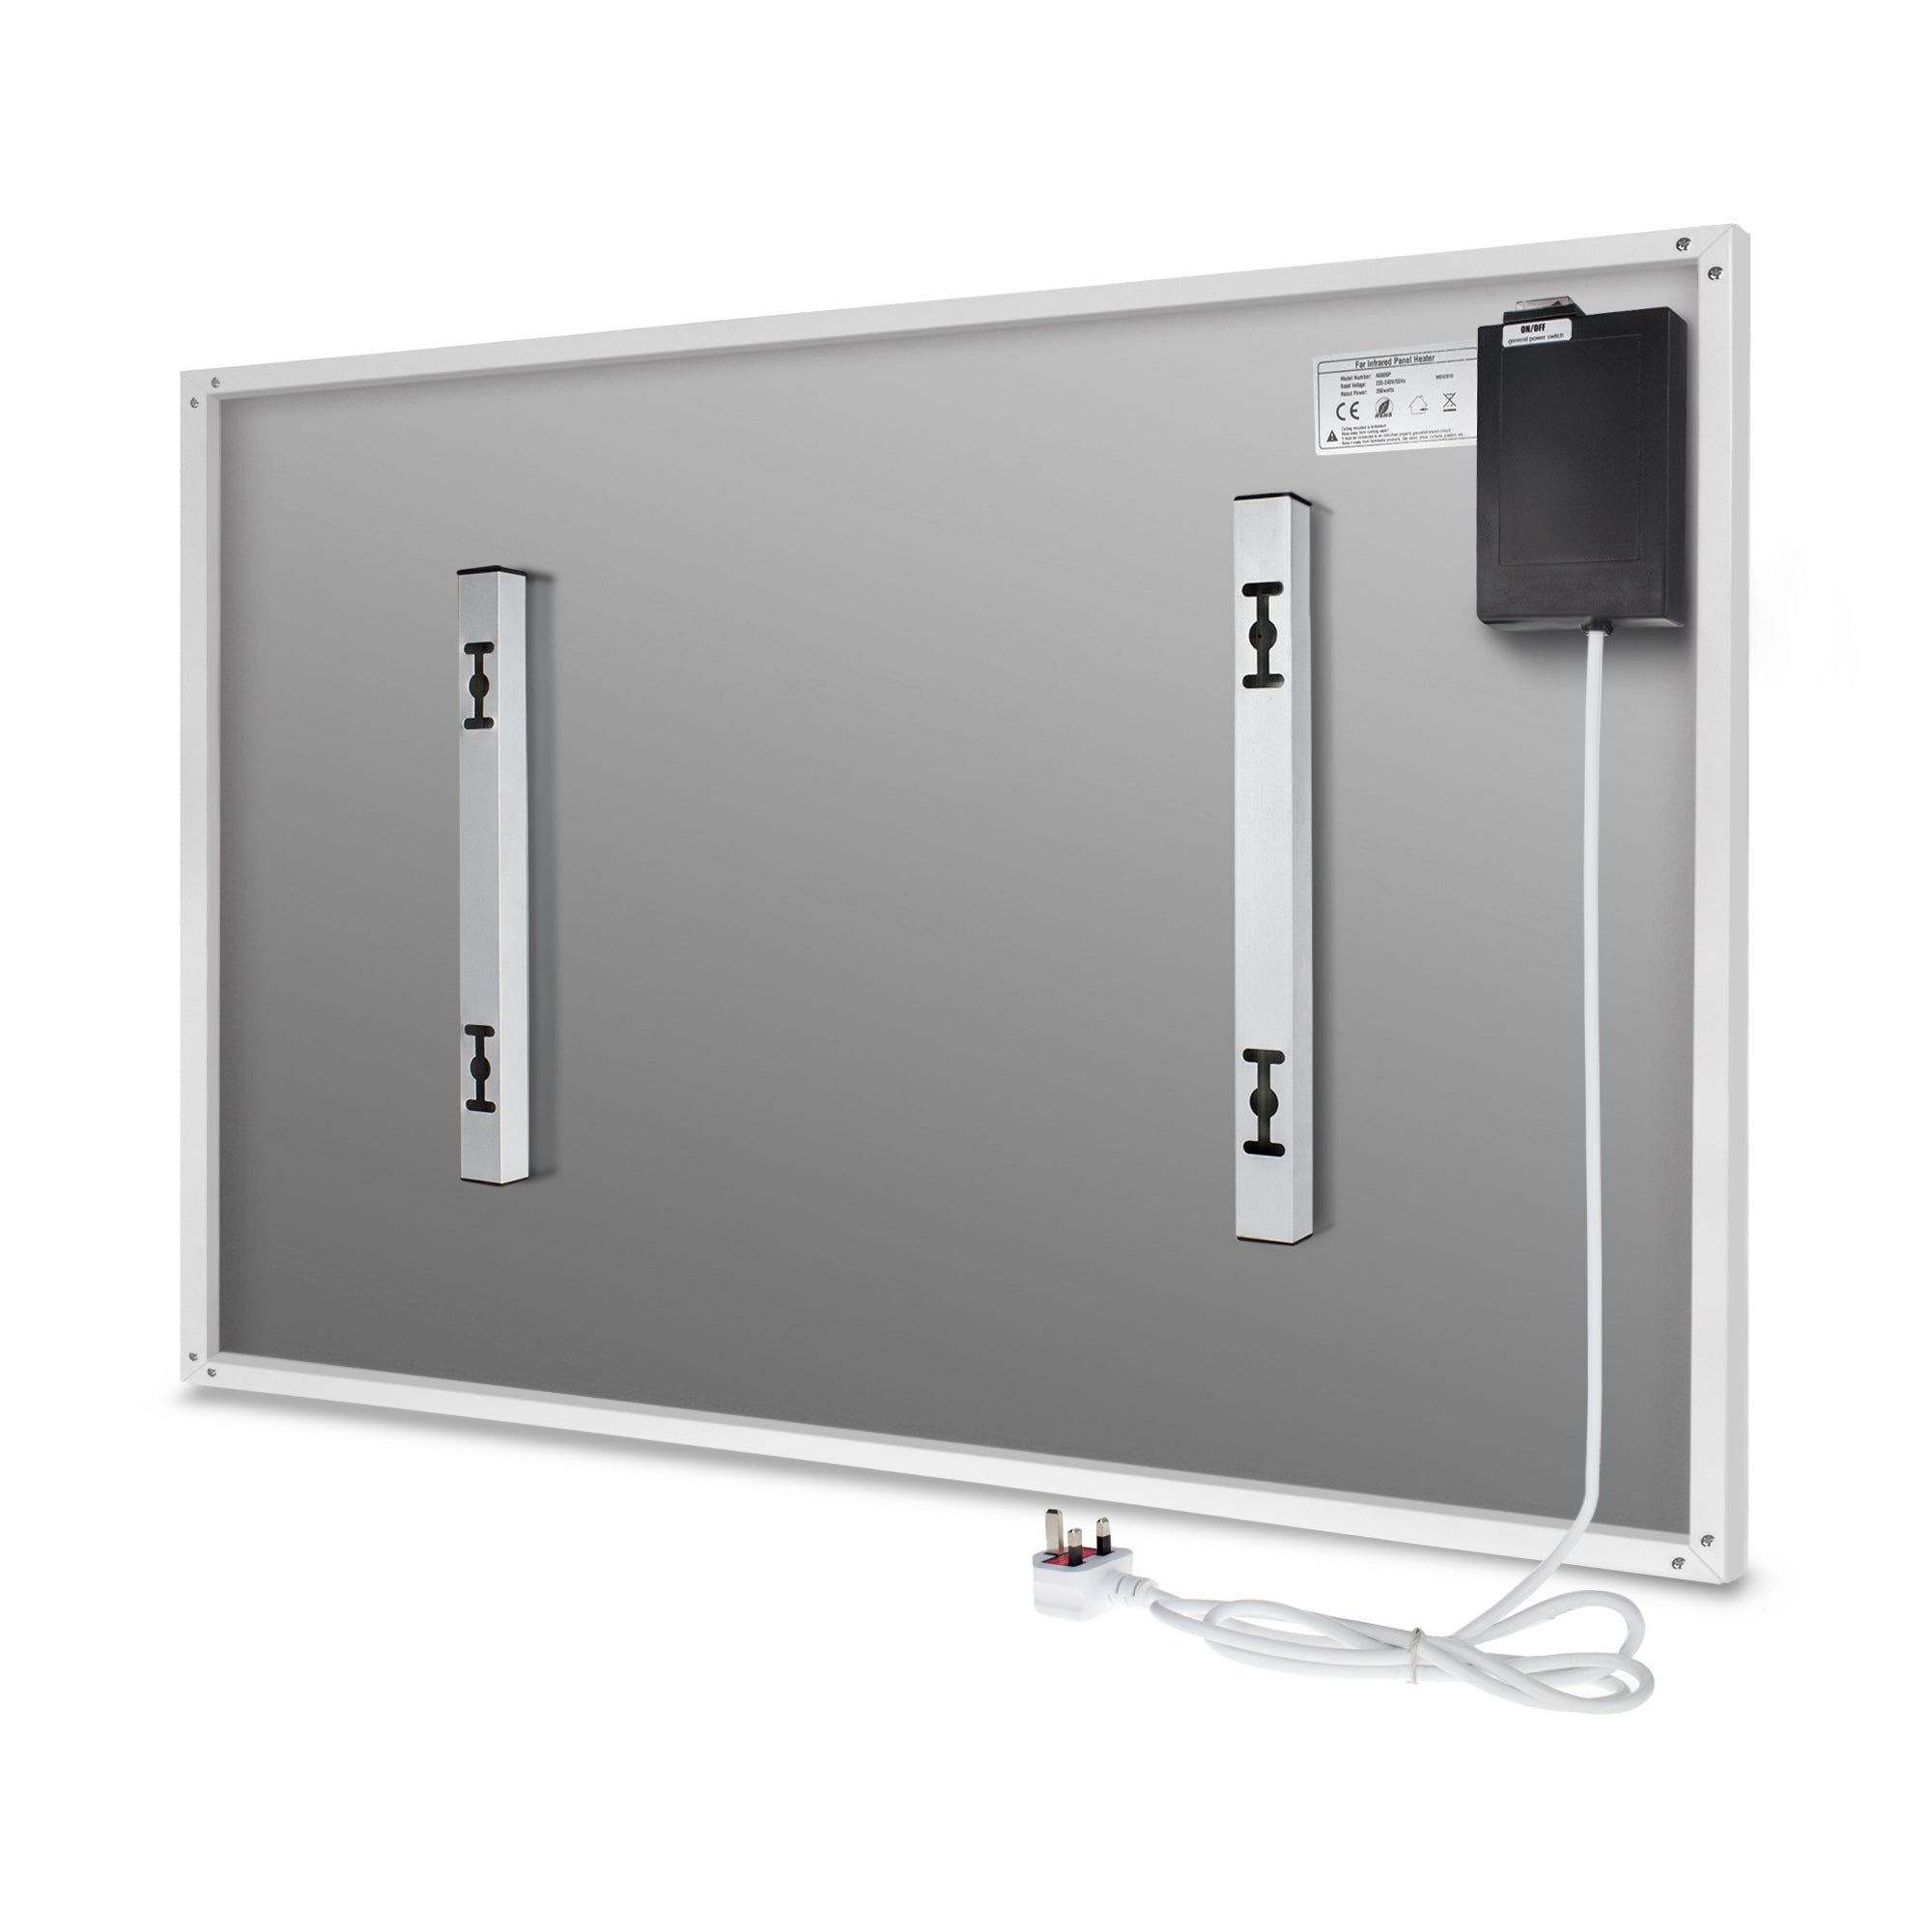 580W Personalised Image IRG Wi-Fi Infrared Heating Panel - Electric Wall Panel Heater